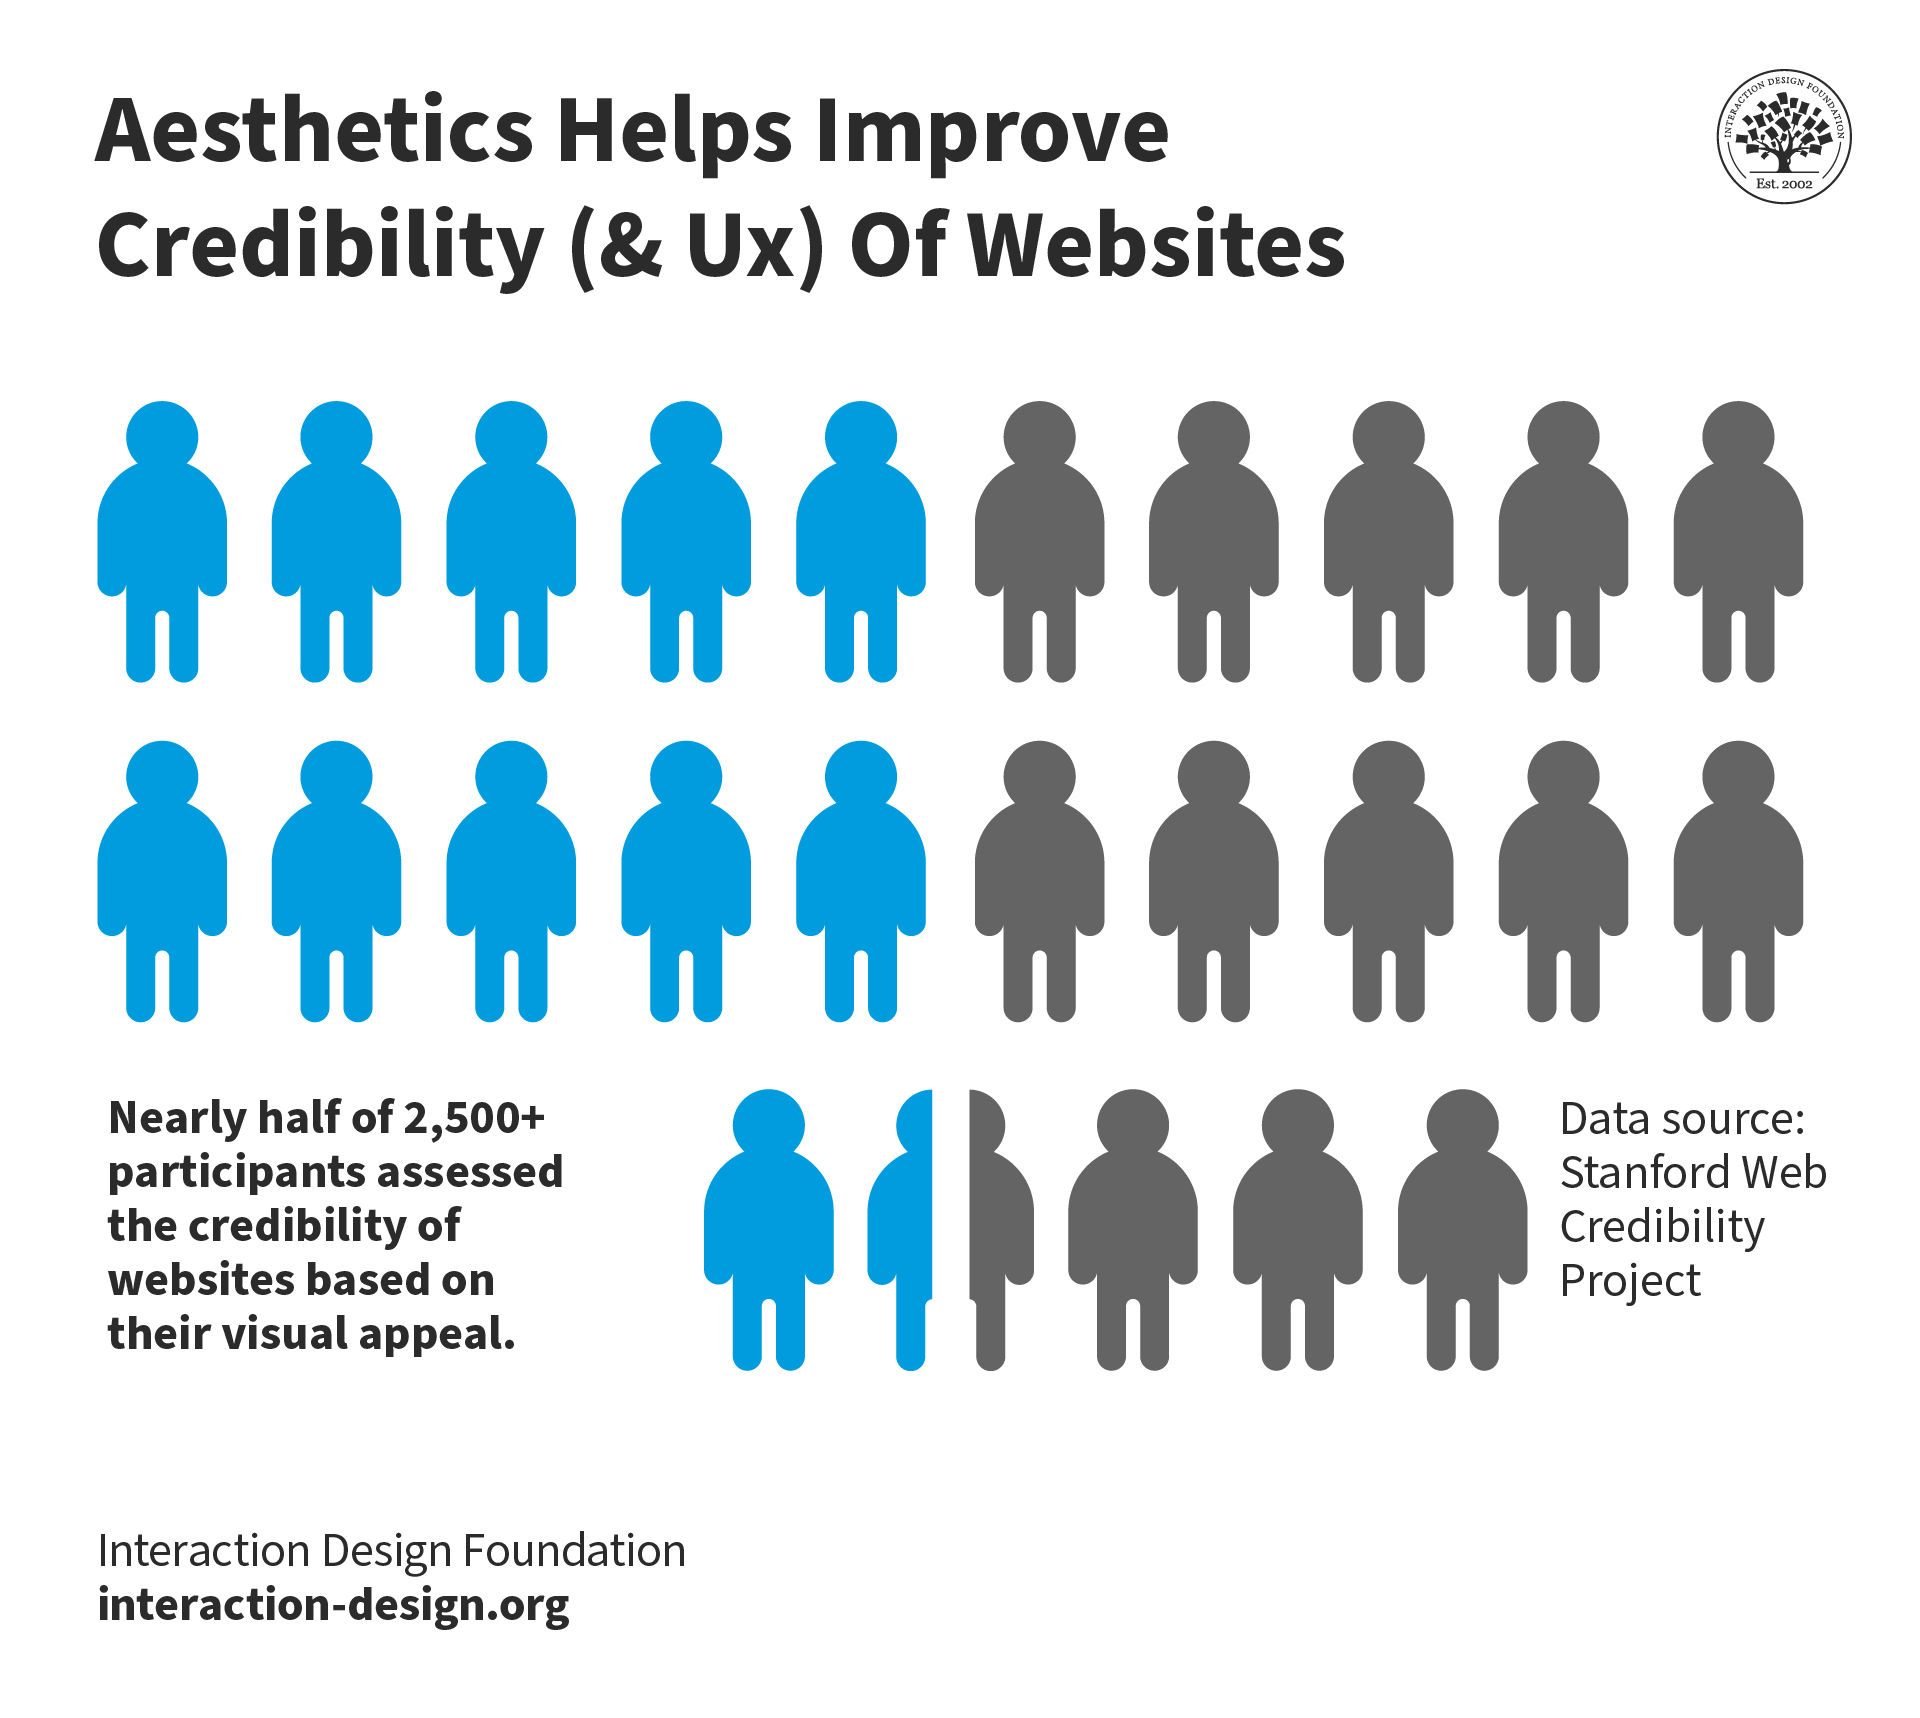 Diagram showing statistics about aesthetics and credibility on websites.